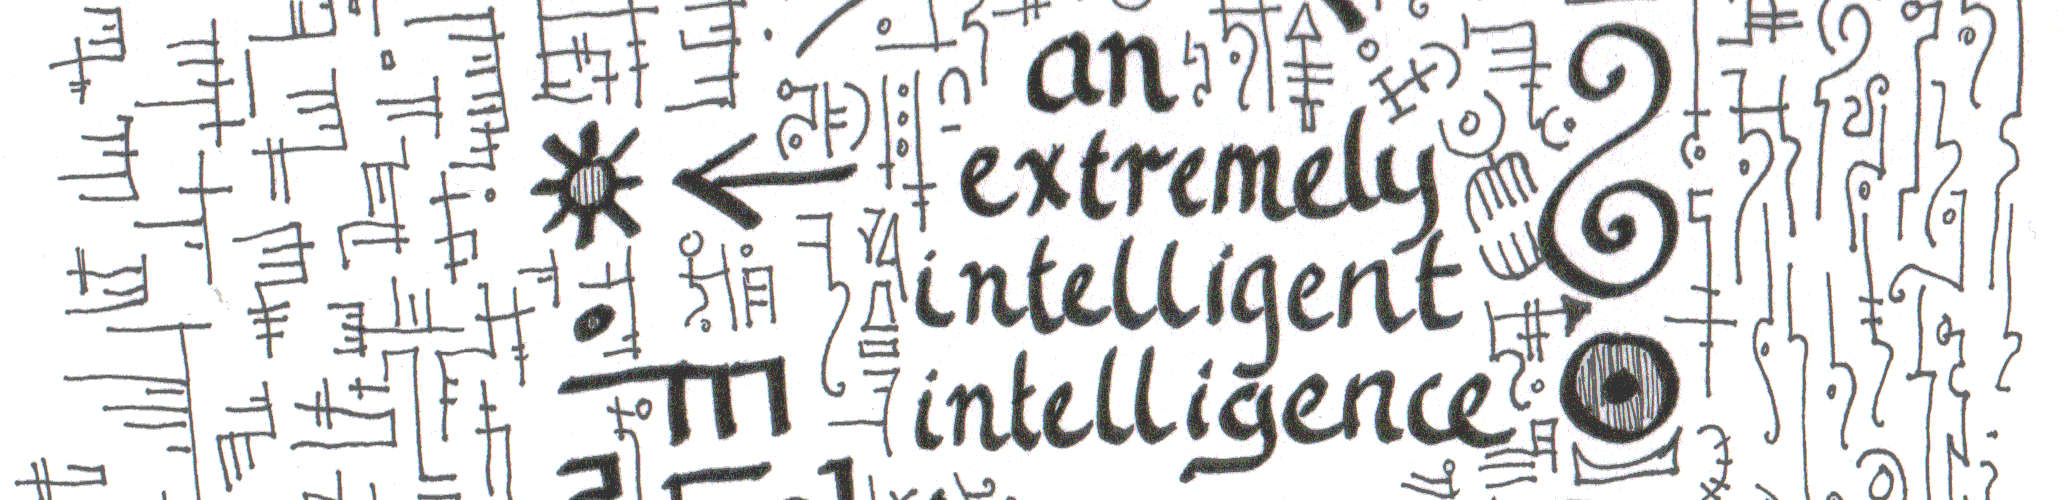 An extremely intelligent intelligence. Ink on paper, word art with abstract glyphs. Own work. 2020.